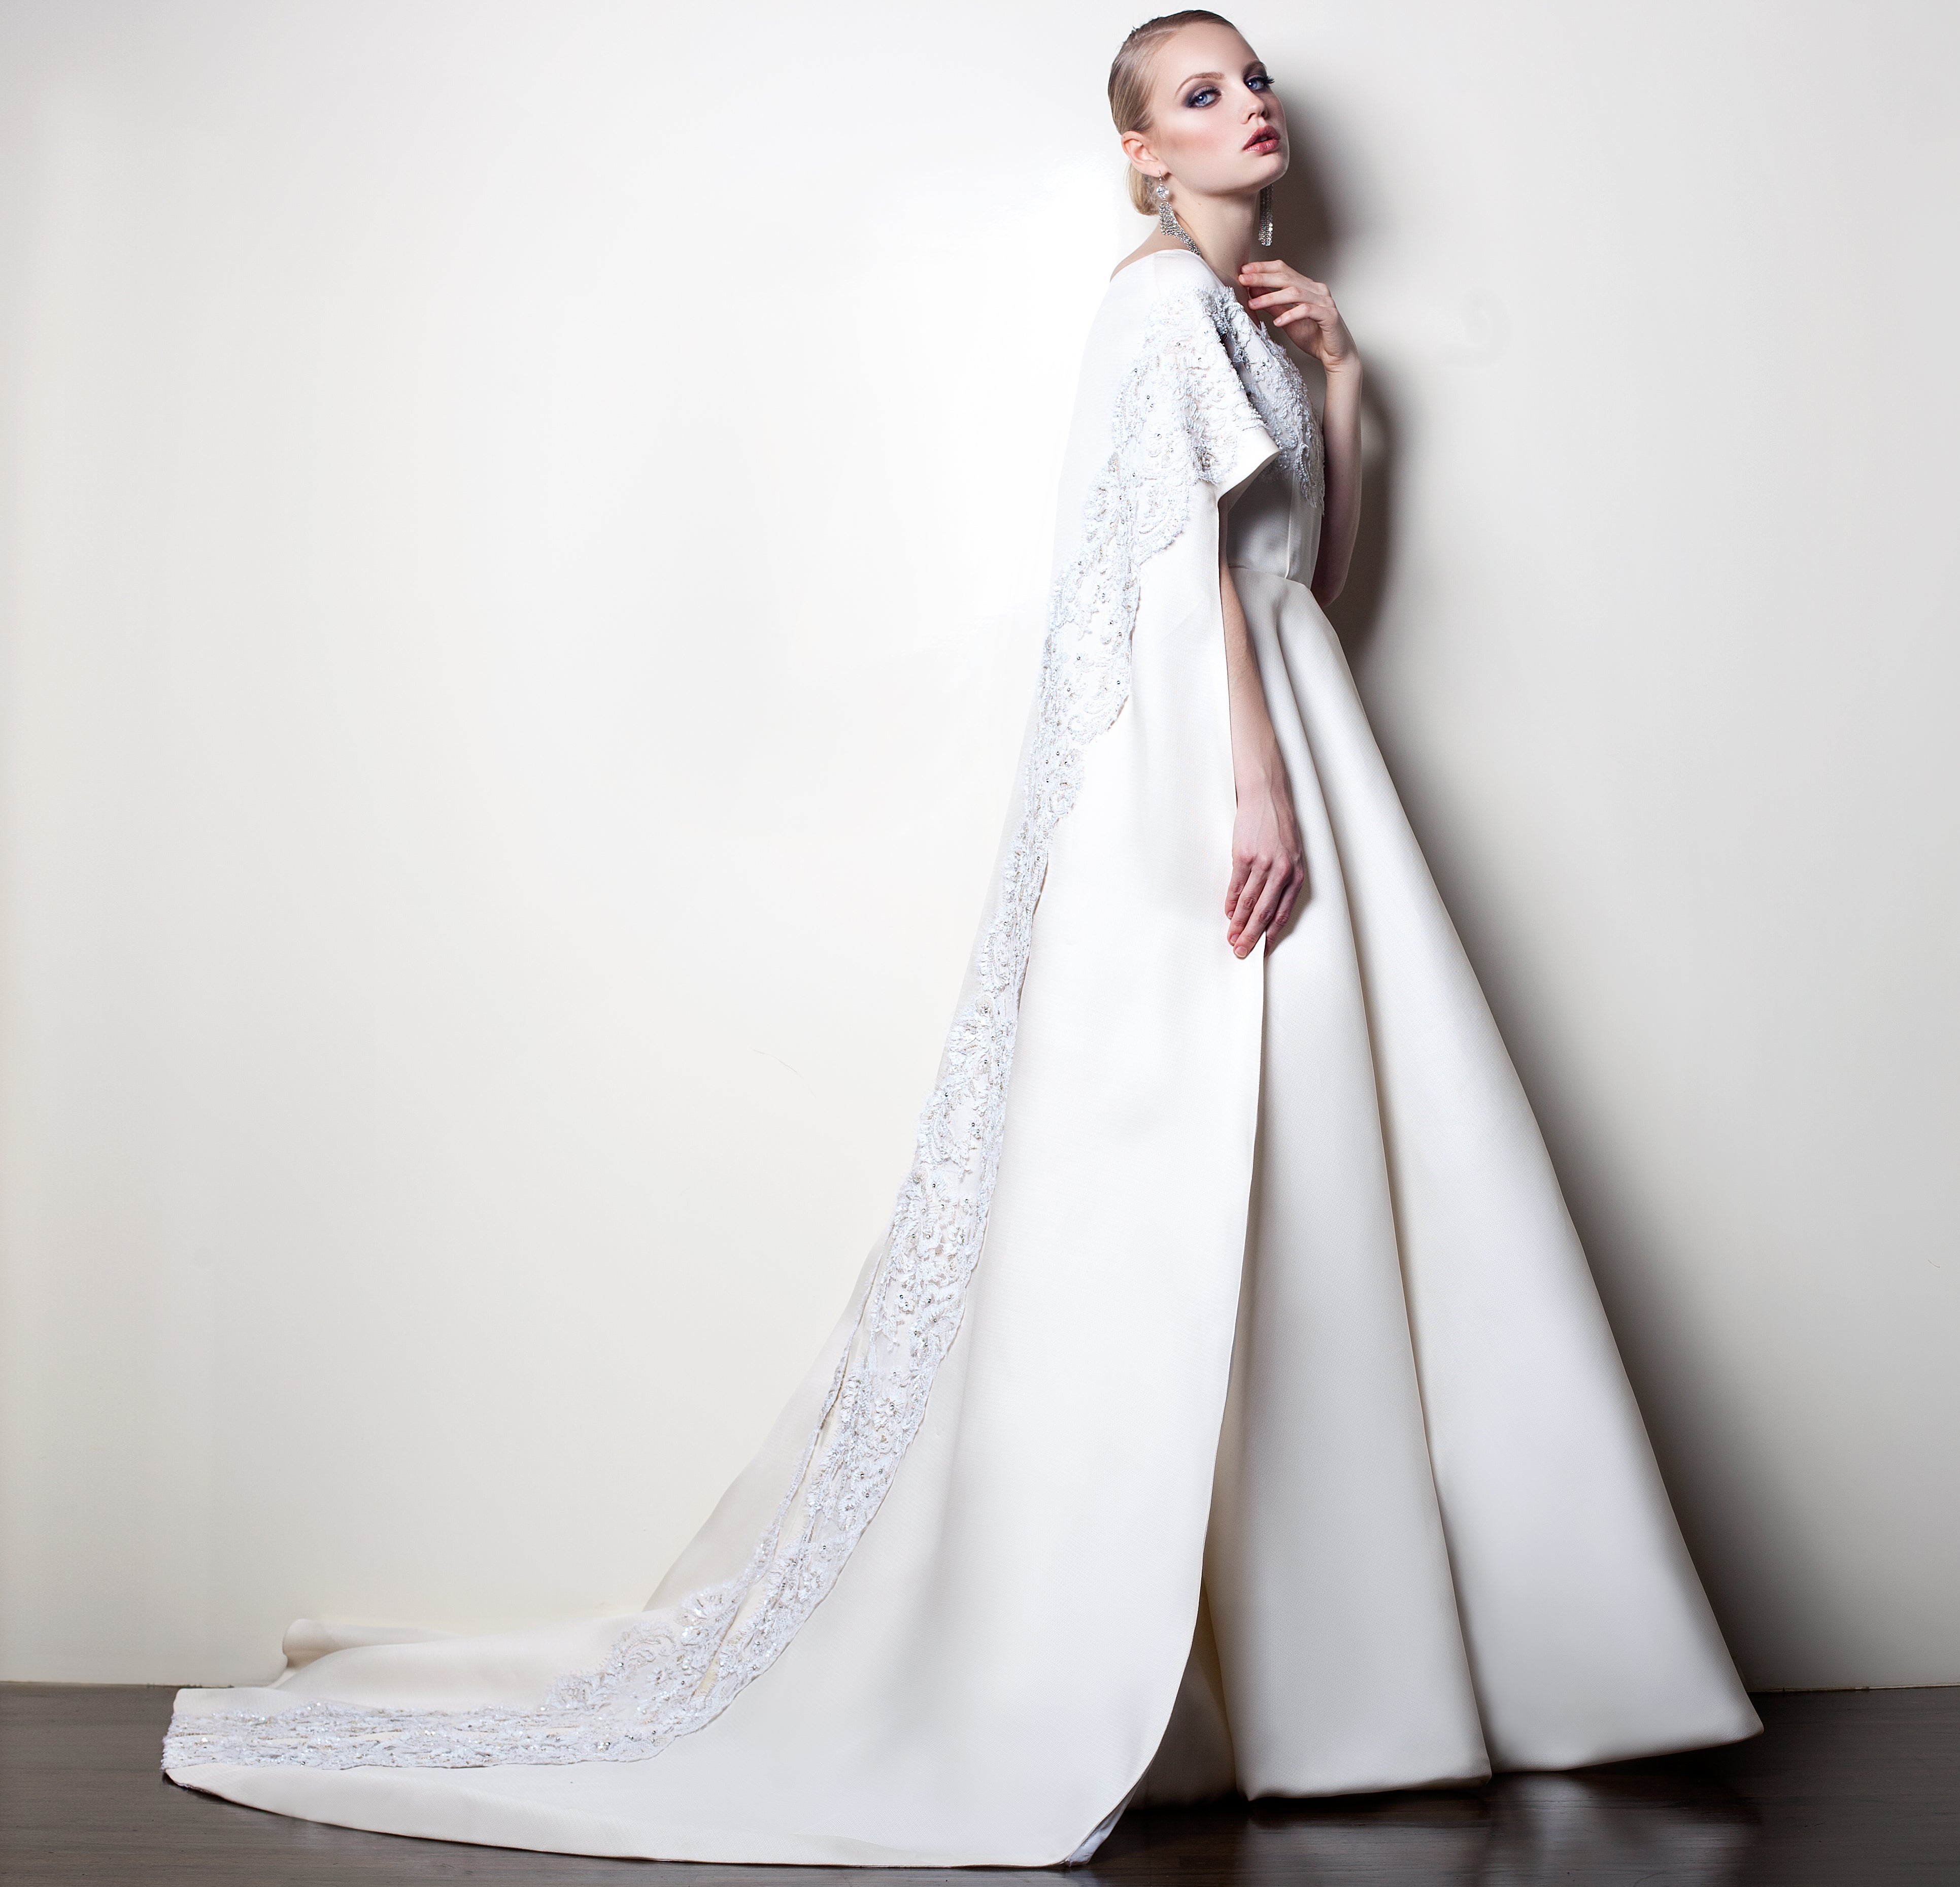 Sustainable Fashion | CELESTINO | Couture | Hudson Valley | Hudson New York | ﻿﻿White | Basket Woven Organza | Cape | Bridal Gown | Beaded | French Chantilly Lace | Train